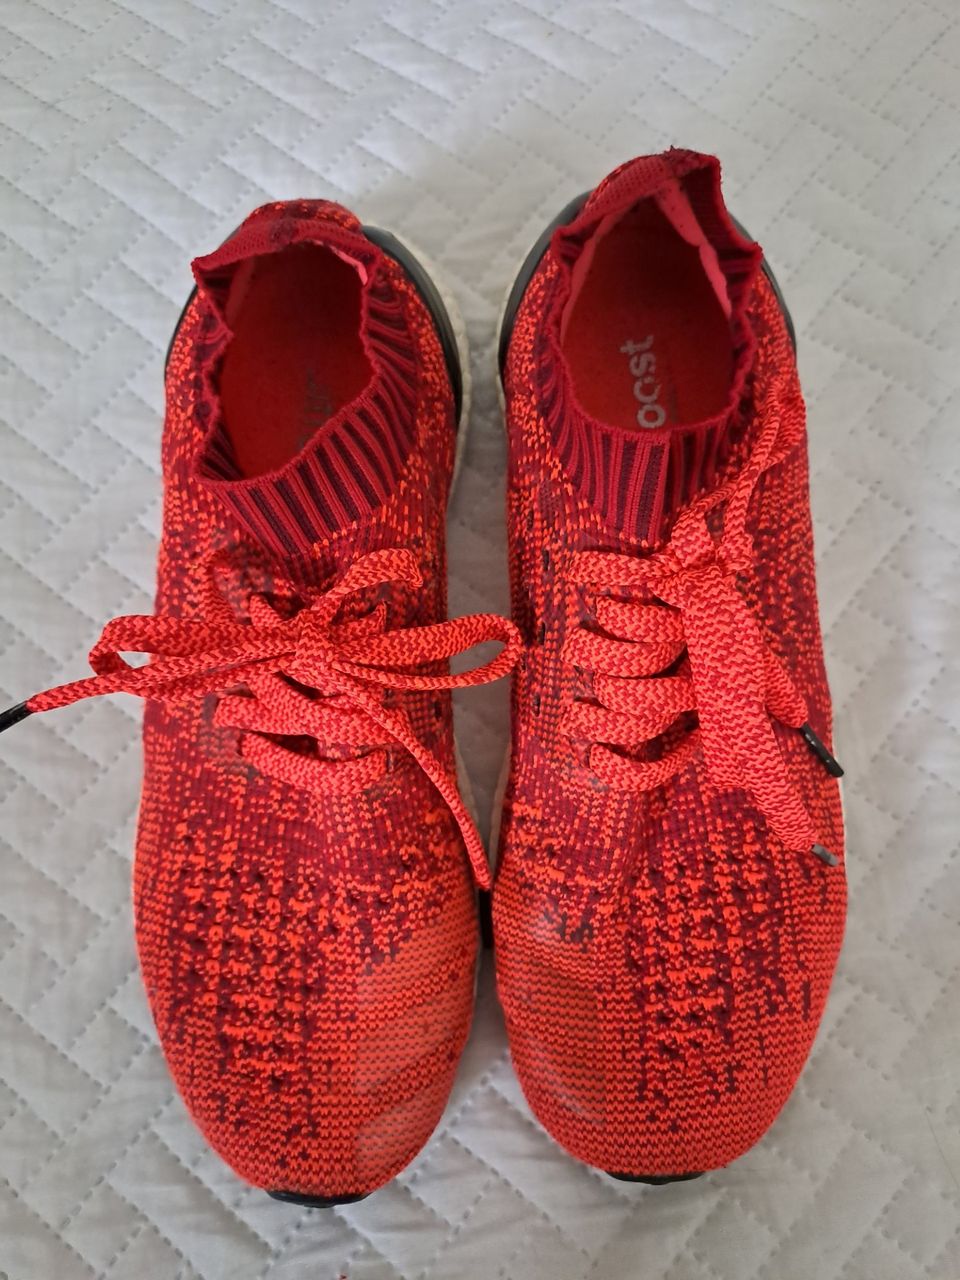 Adidas Ultraboost Uncaged Solar Red